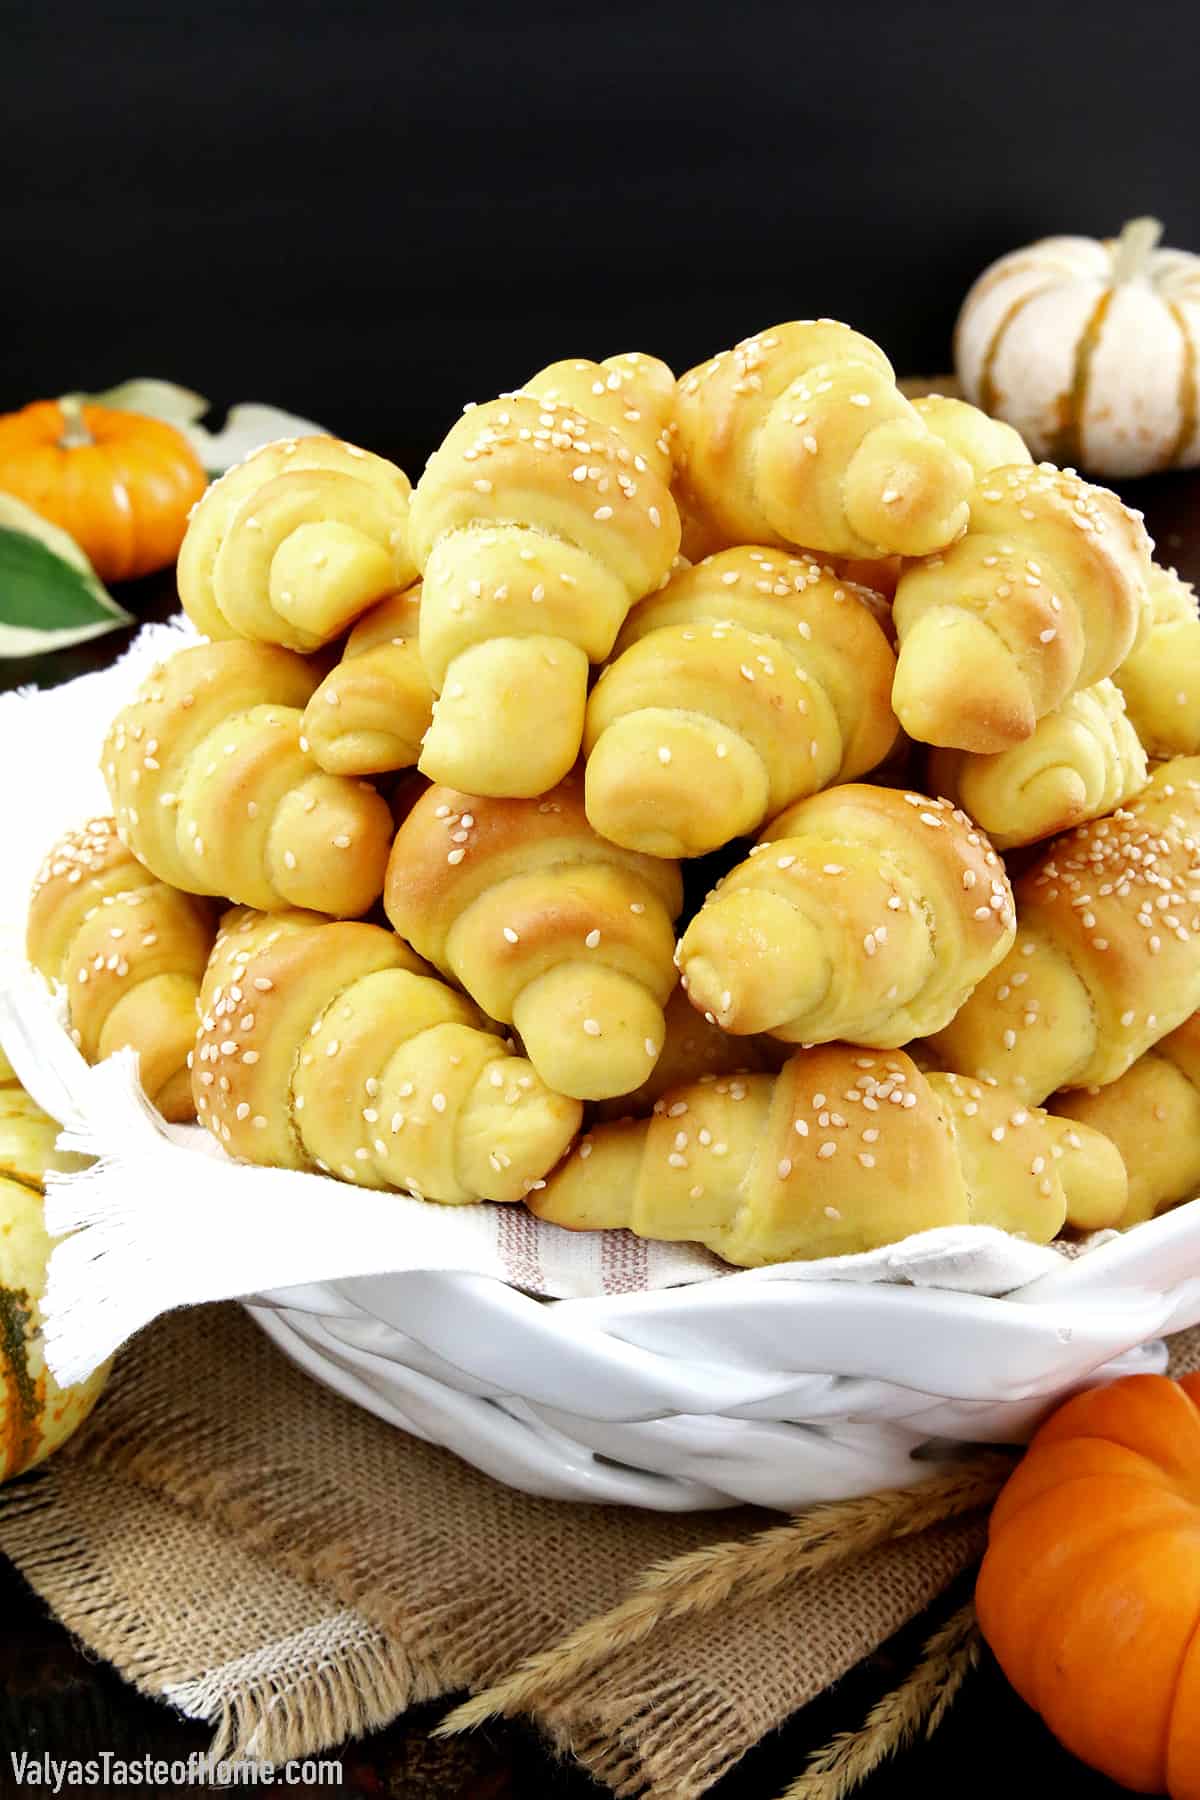 These Easy Soft and Fluffy Pumpkin Dinner Rolls are truly as dreamy as the title describes them. When it's rainy out, it is the perfect season to stay in and enjoy all kinds of comfy, nothing-like-homemade seasonal foods, such as these delicious, soft, fluffy, and pillowy pumpkin dinner rolls.